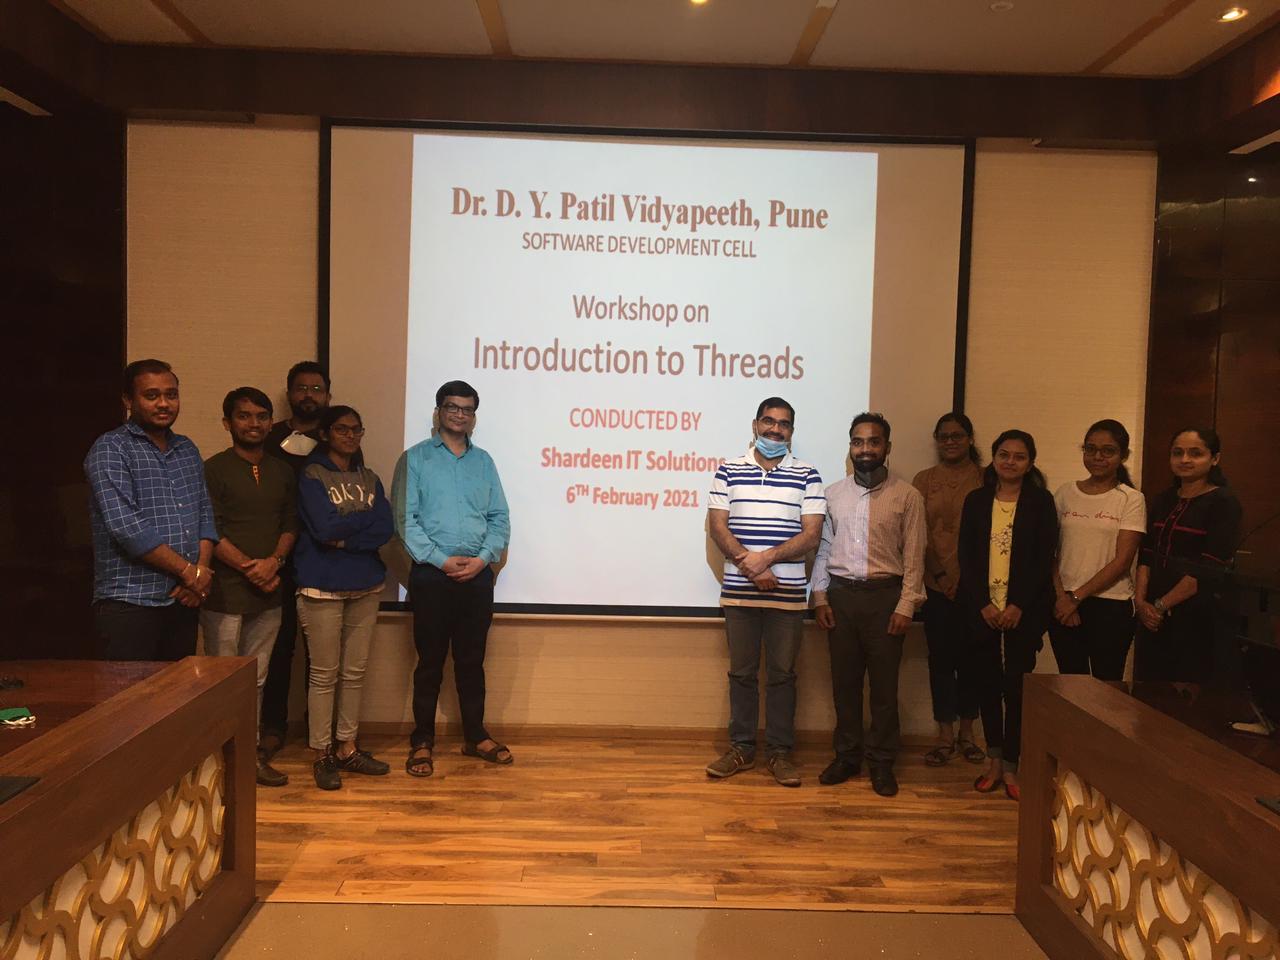 Introduction to Threads in Dr. D Y Patil